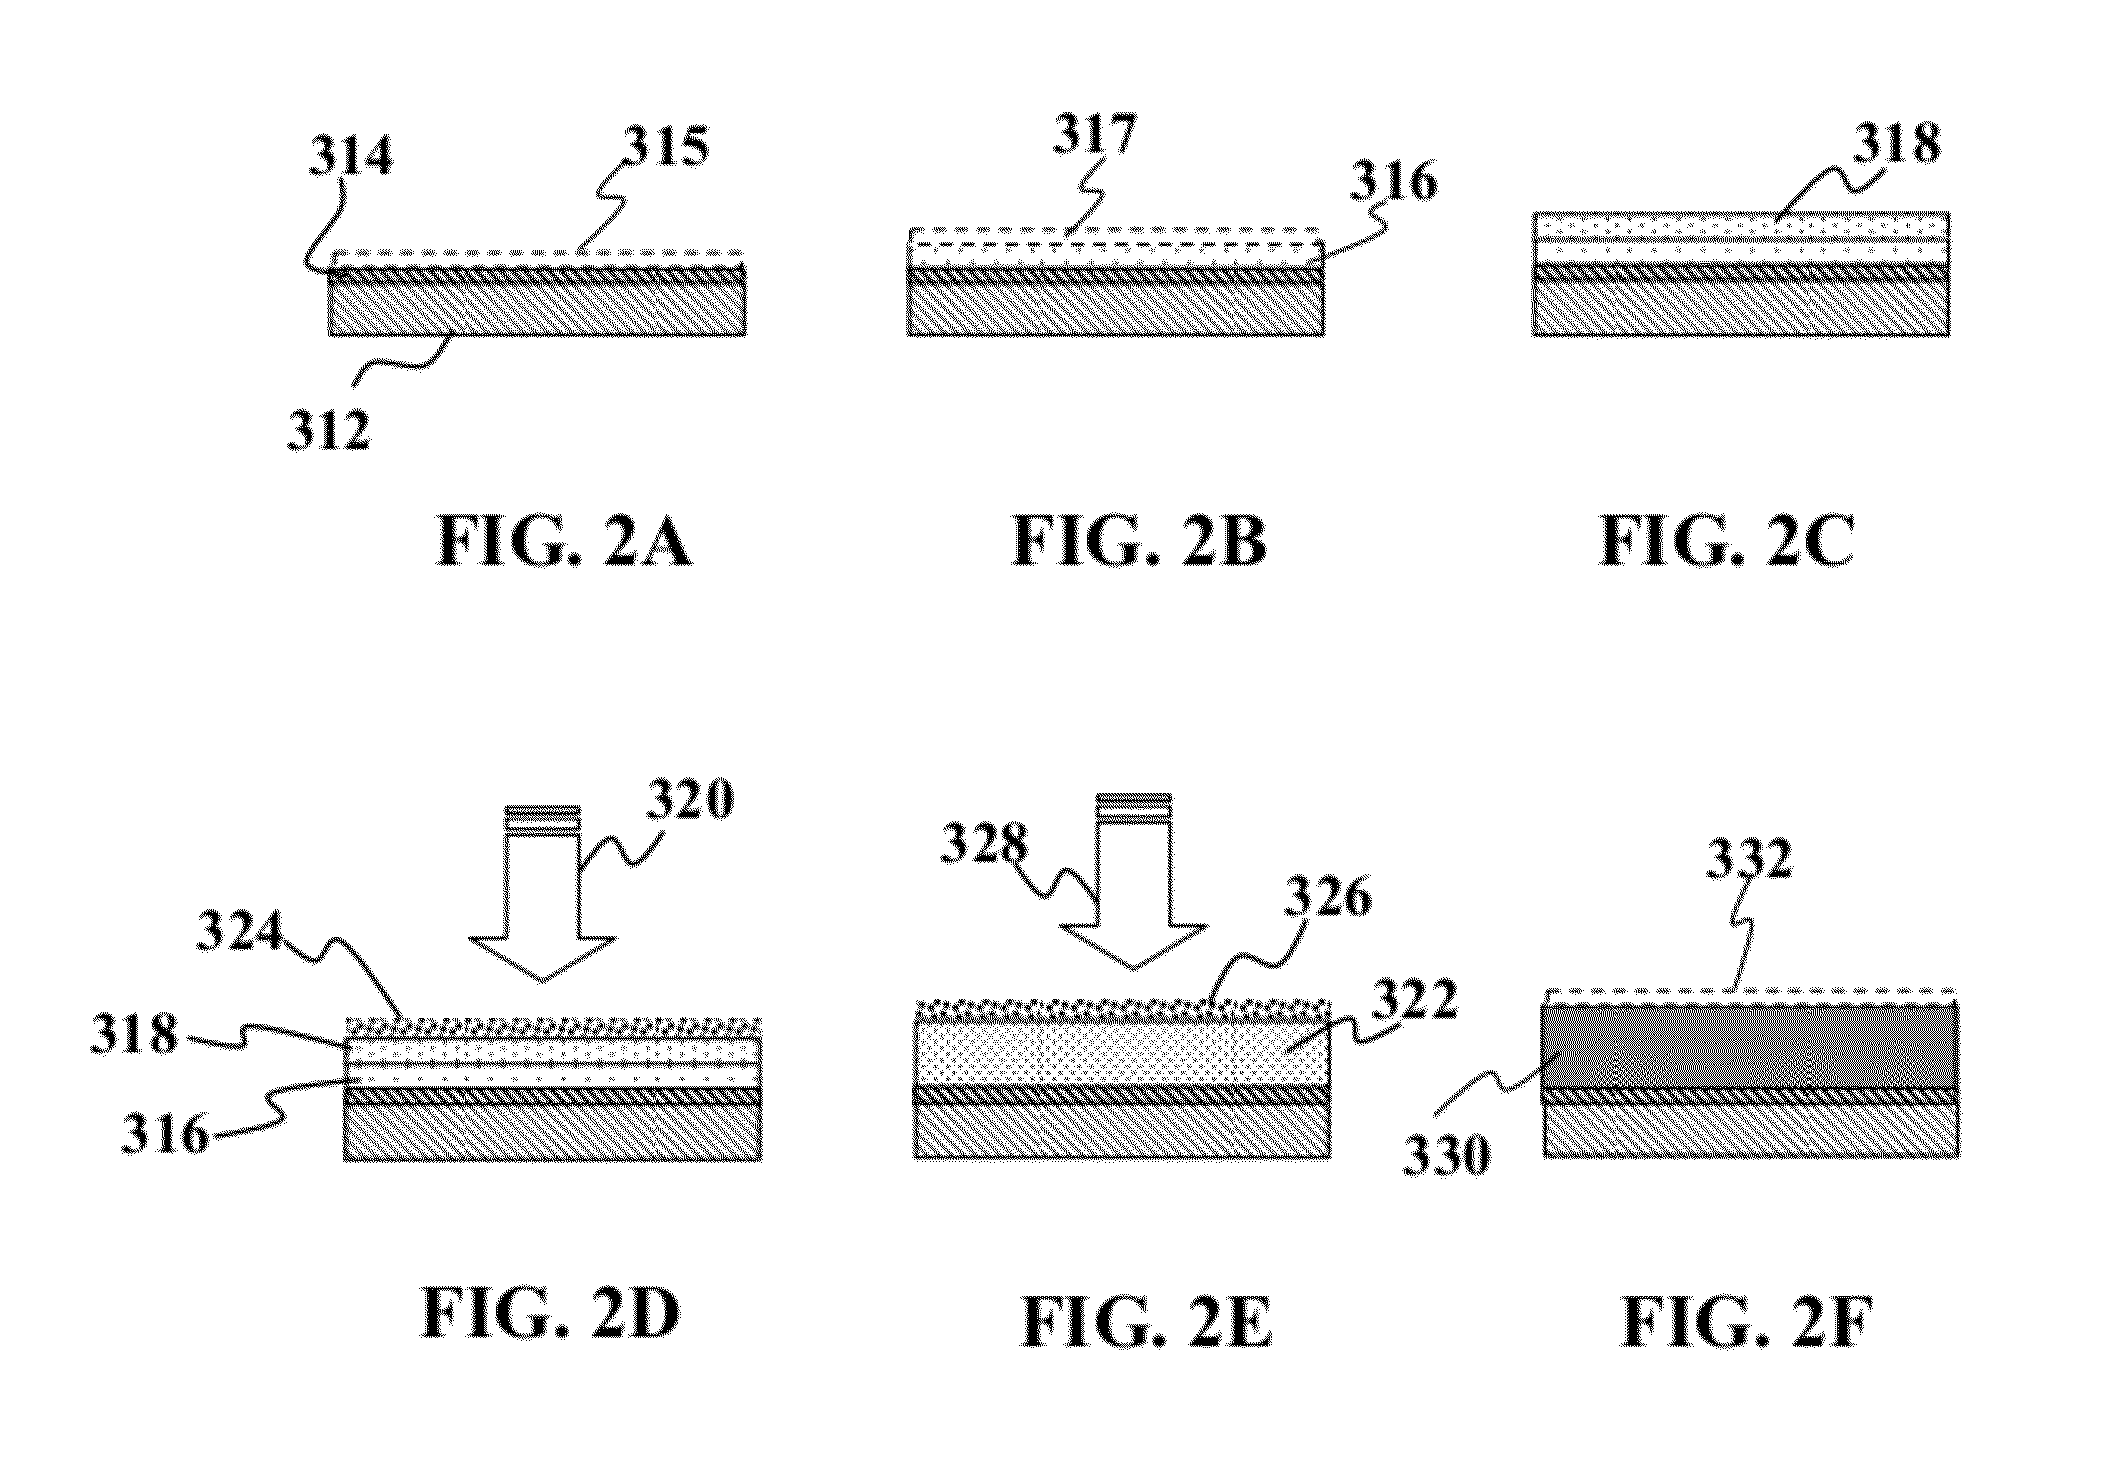 Multi-nary group ib and via based semiconductor